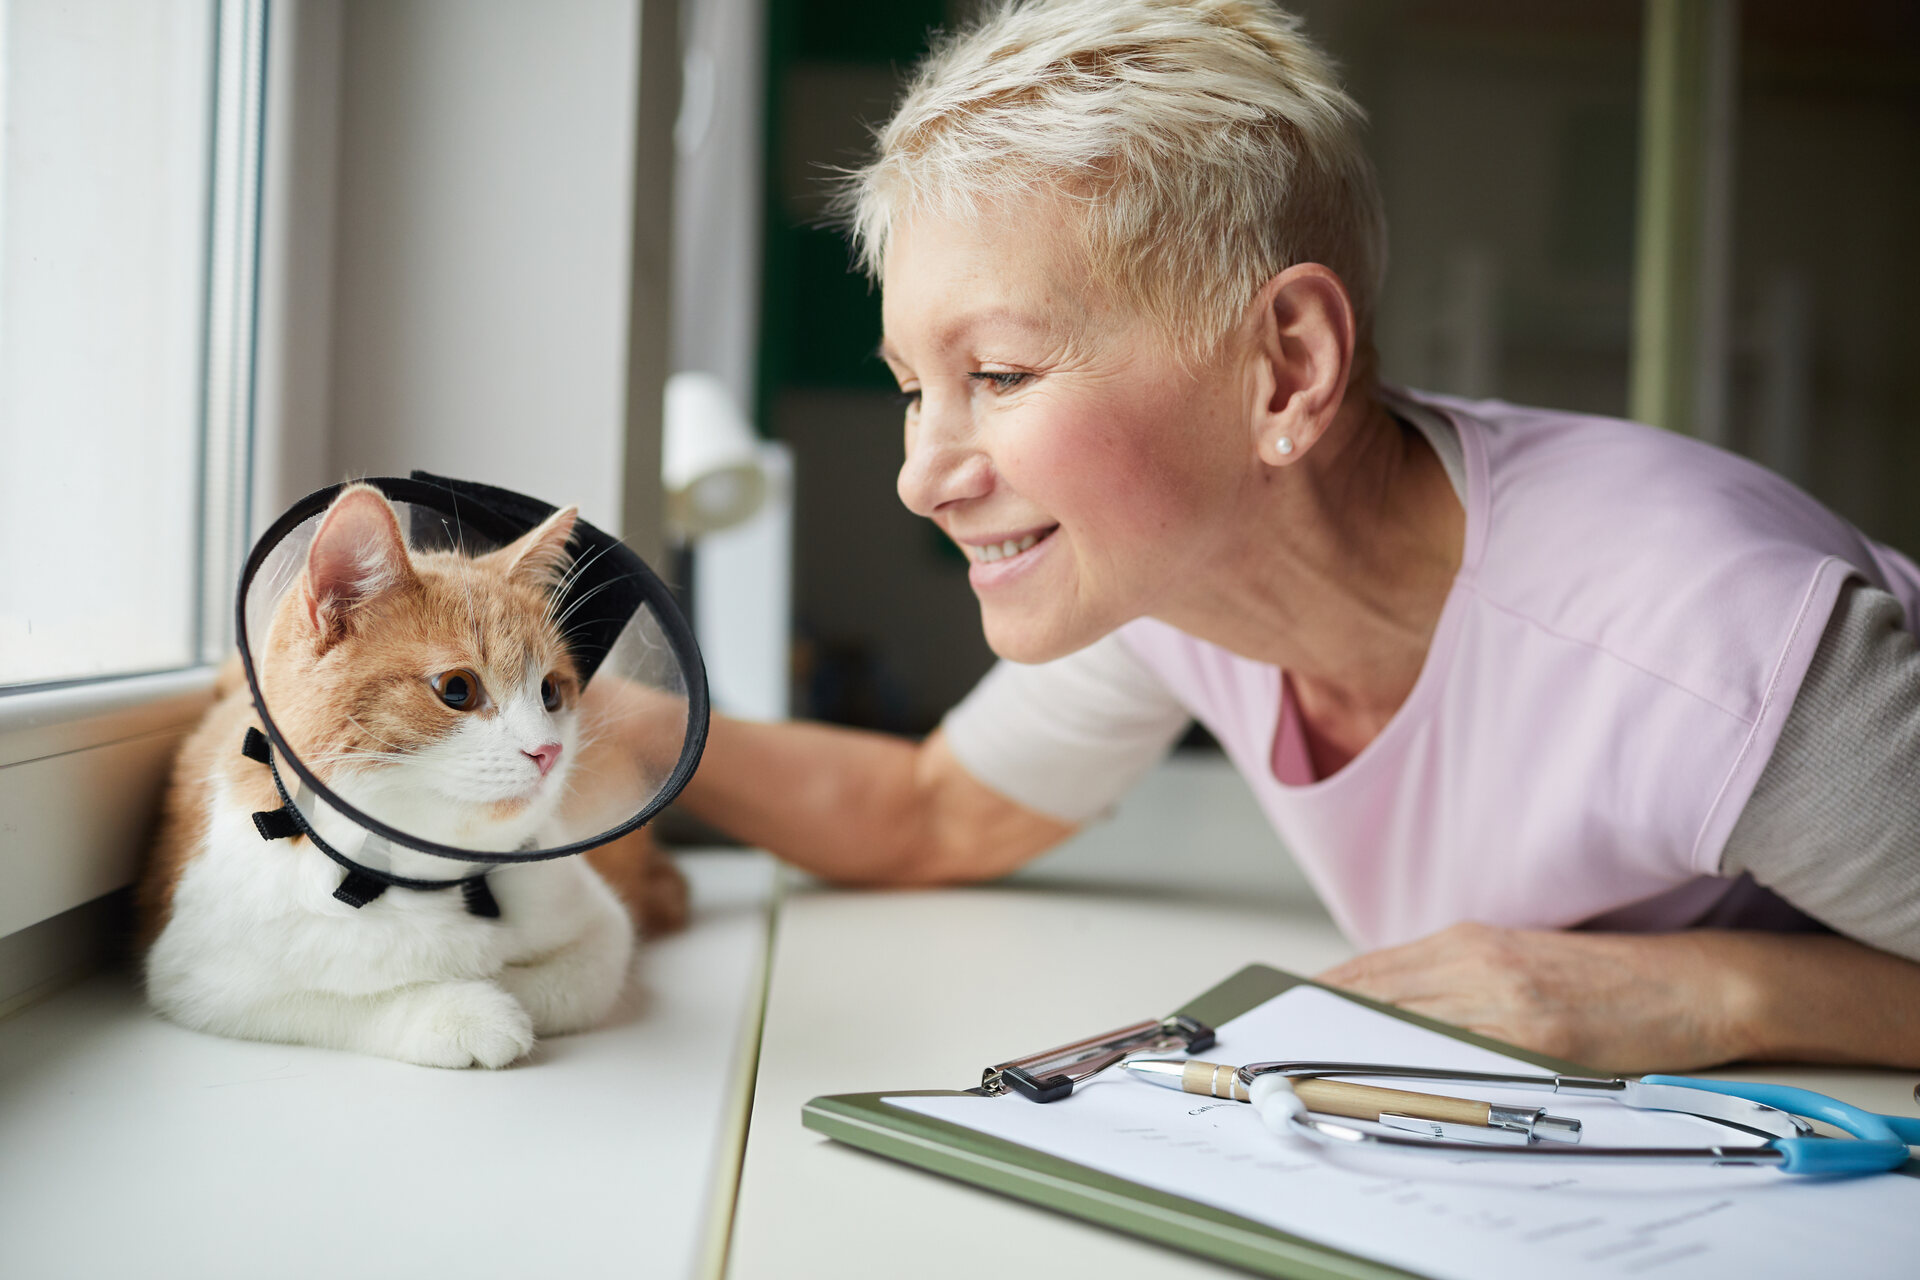 A woman caring for a cat wearing a neck collar